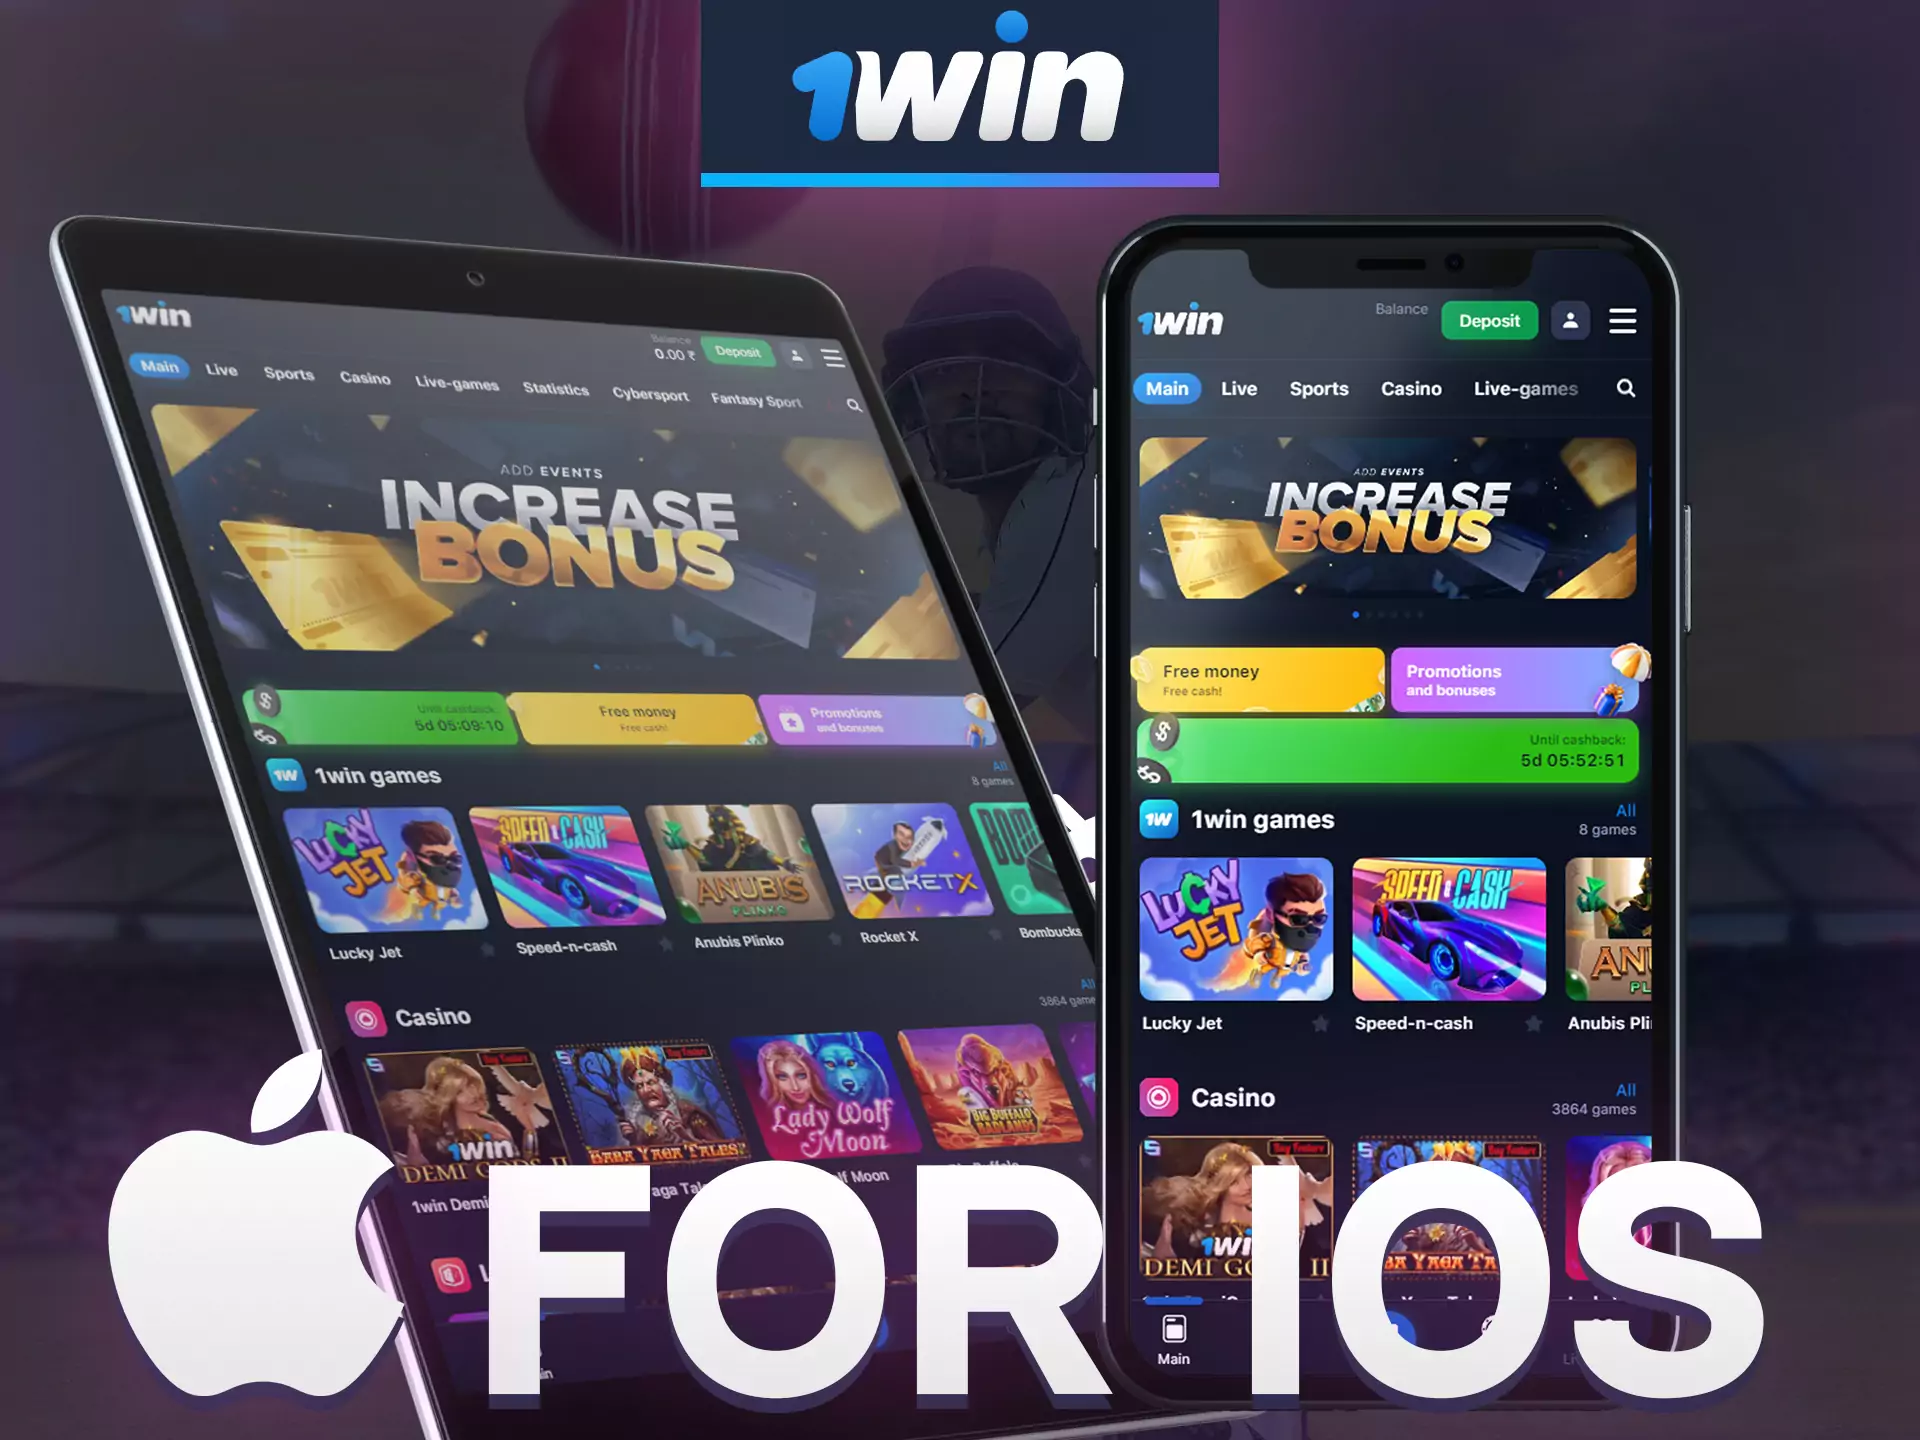 Install 1win app on your iOS device.